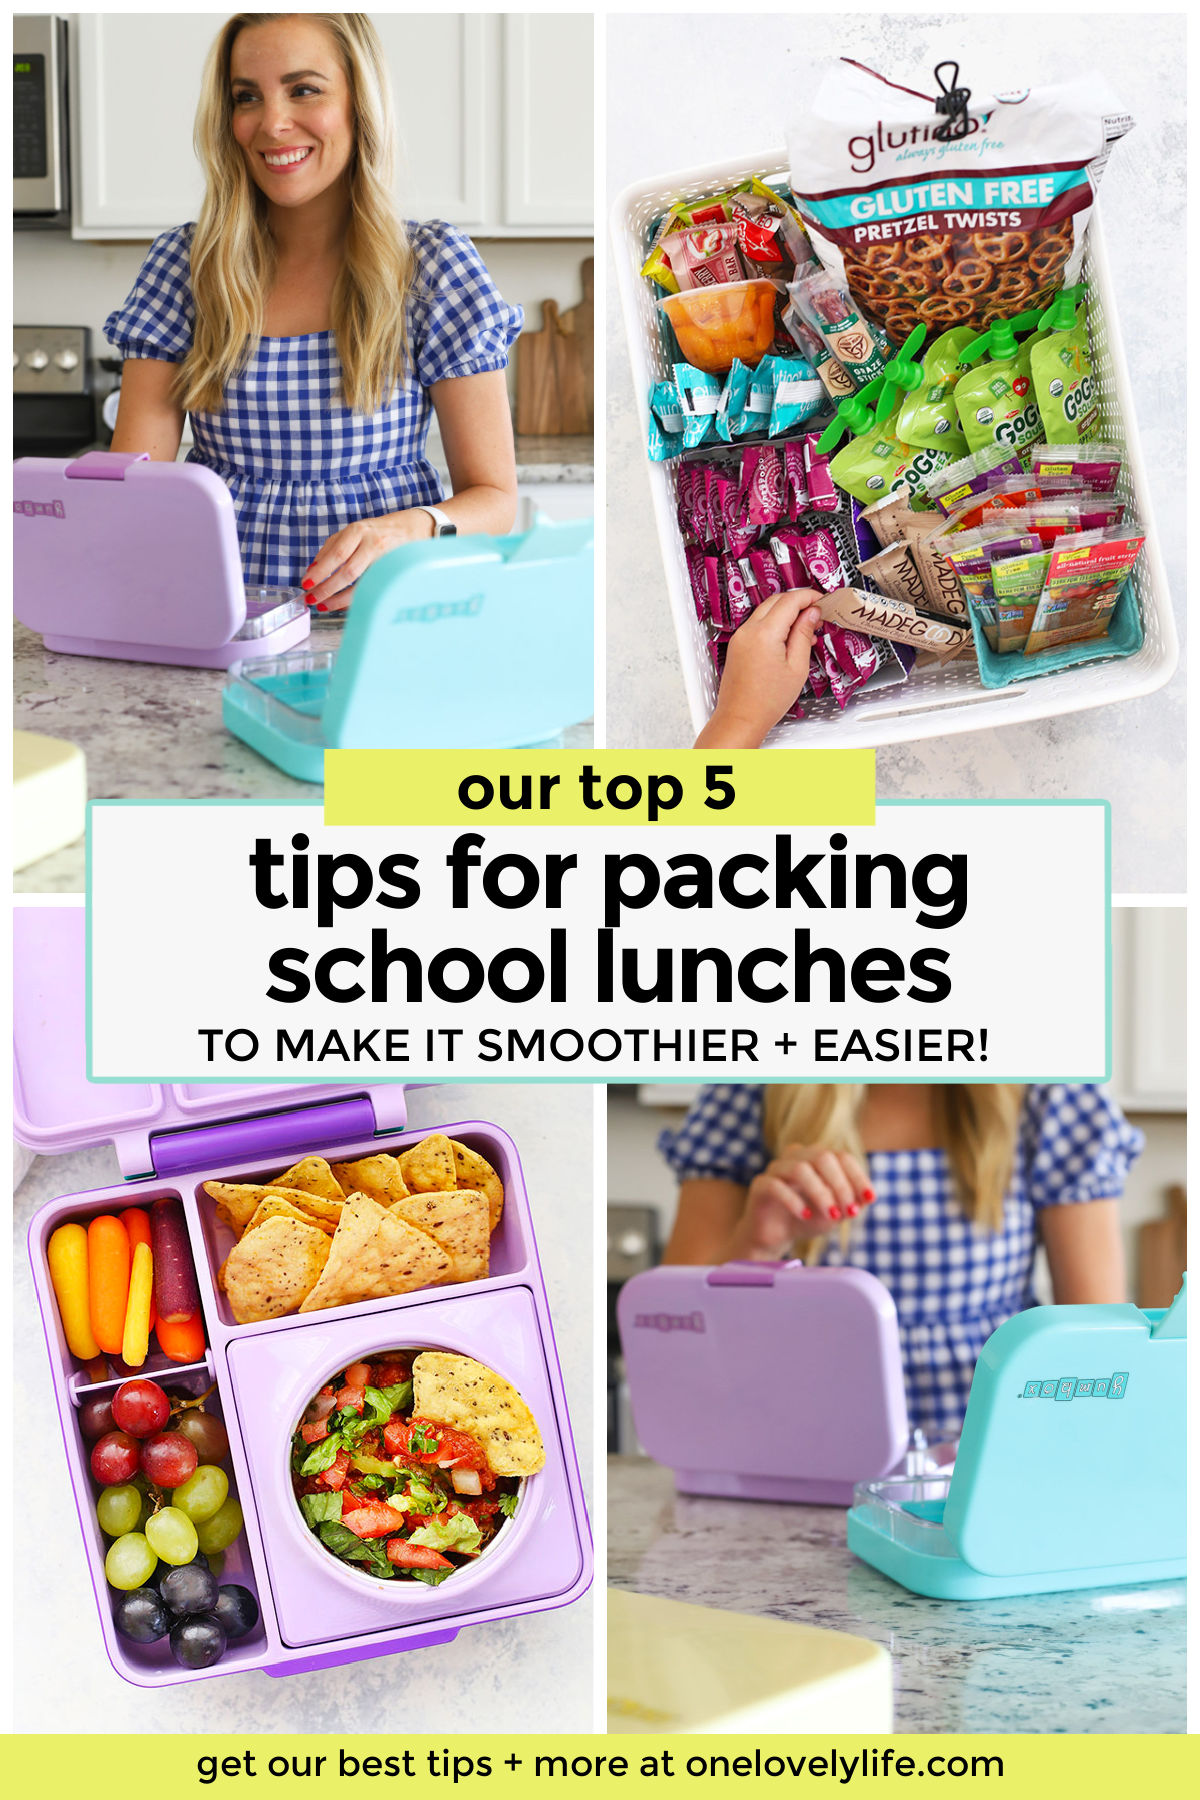 5 Hacks to Simplify Packing School Lunch! All our best school lunch tips and tricks for making school lunches fast and easy! // school lunches // school lunch ideas // mom hacks // time saving hacks // healthy lunches #packedlunch #schoollunch #momtip #backtoschool #lunch